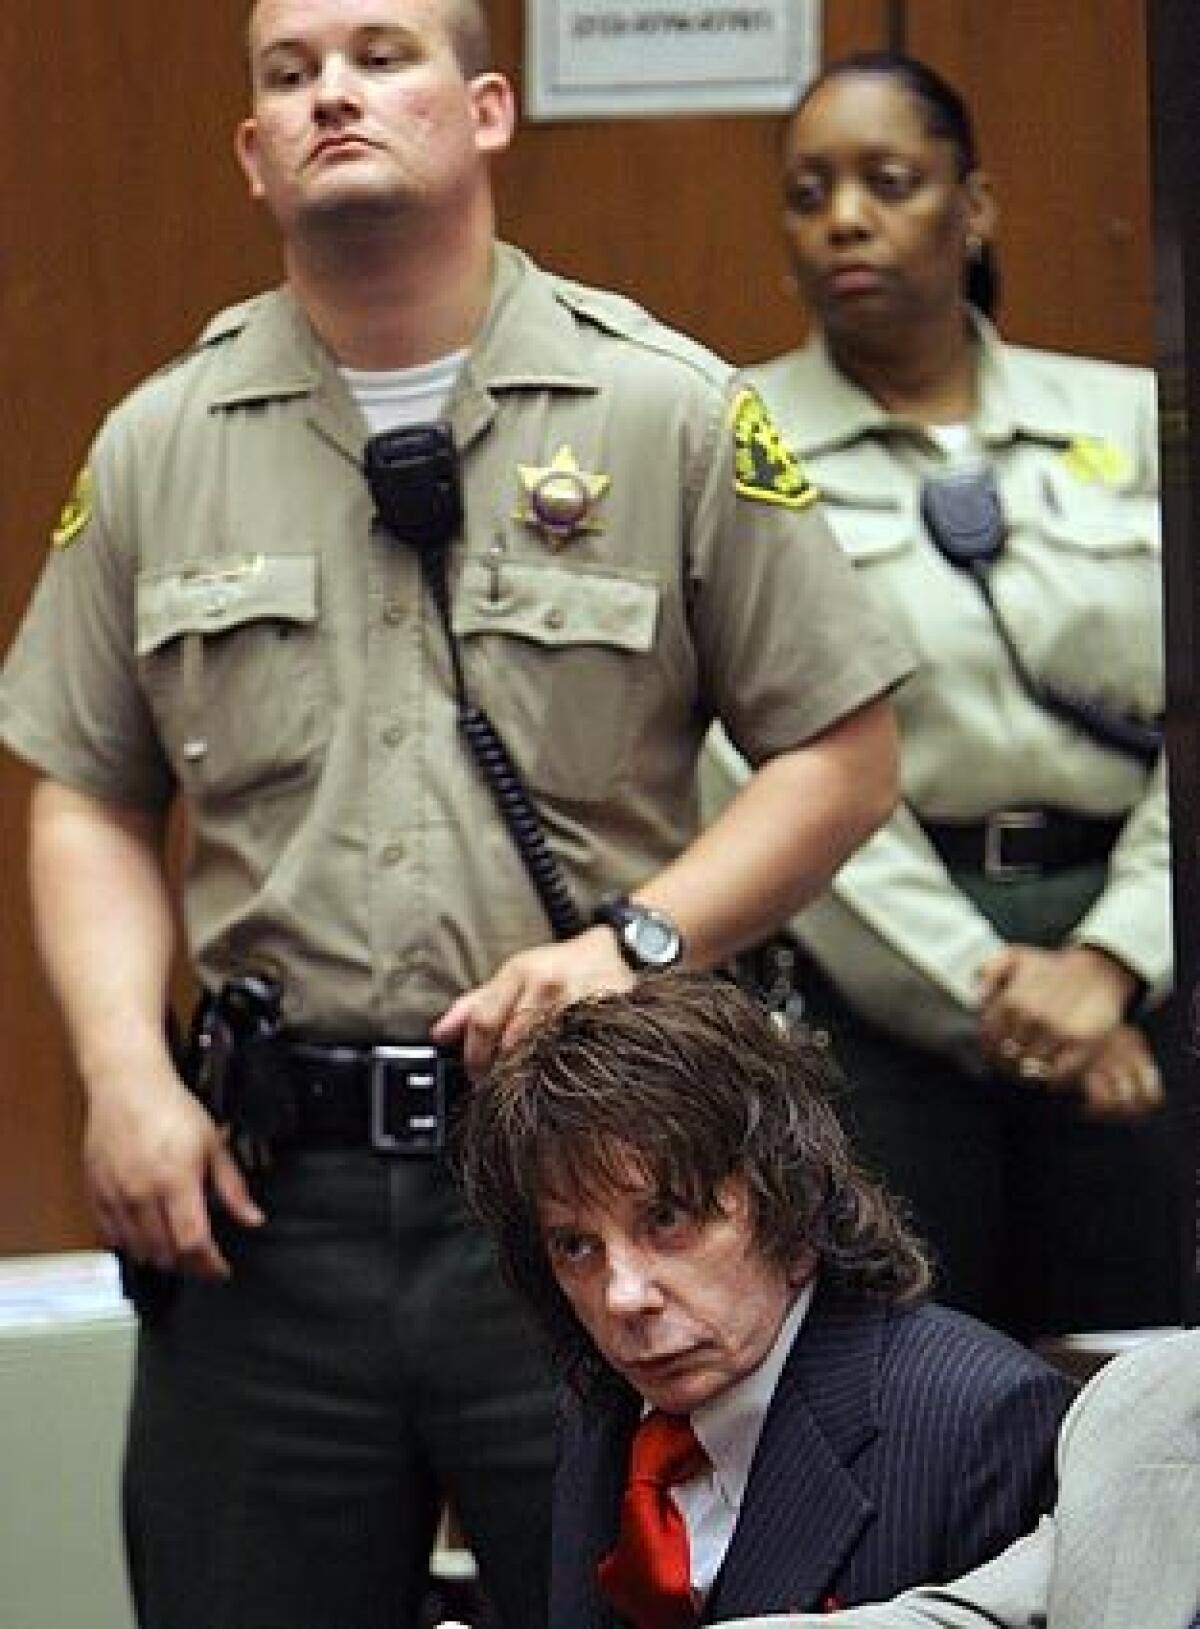 Music producer Phil Spector appears in court Friday to hear his sentence: 19 years to life in prison. Spector, 69, was convicted last month of second-degree murder in the death of actress Lana Clarkson, 40, who was shot in his Alhambra mansion.